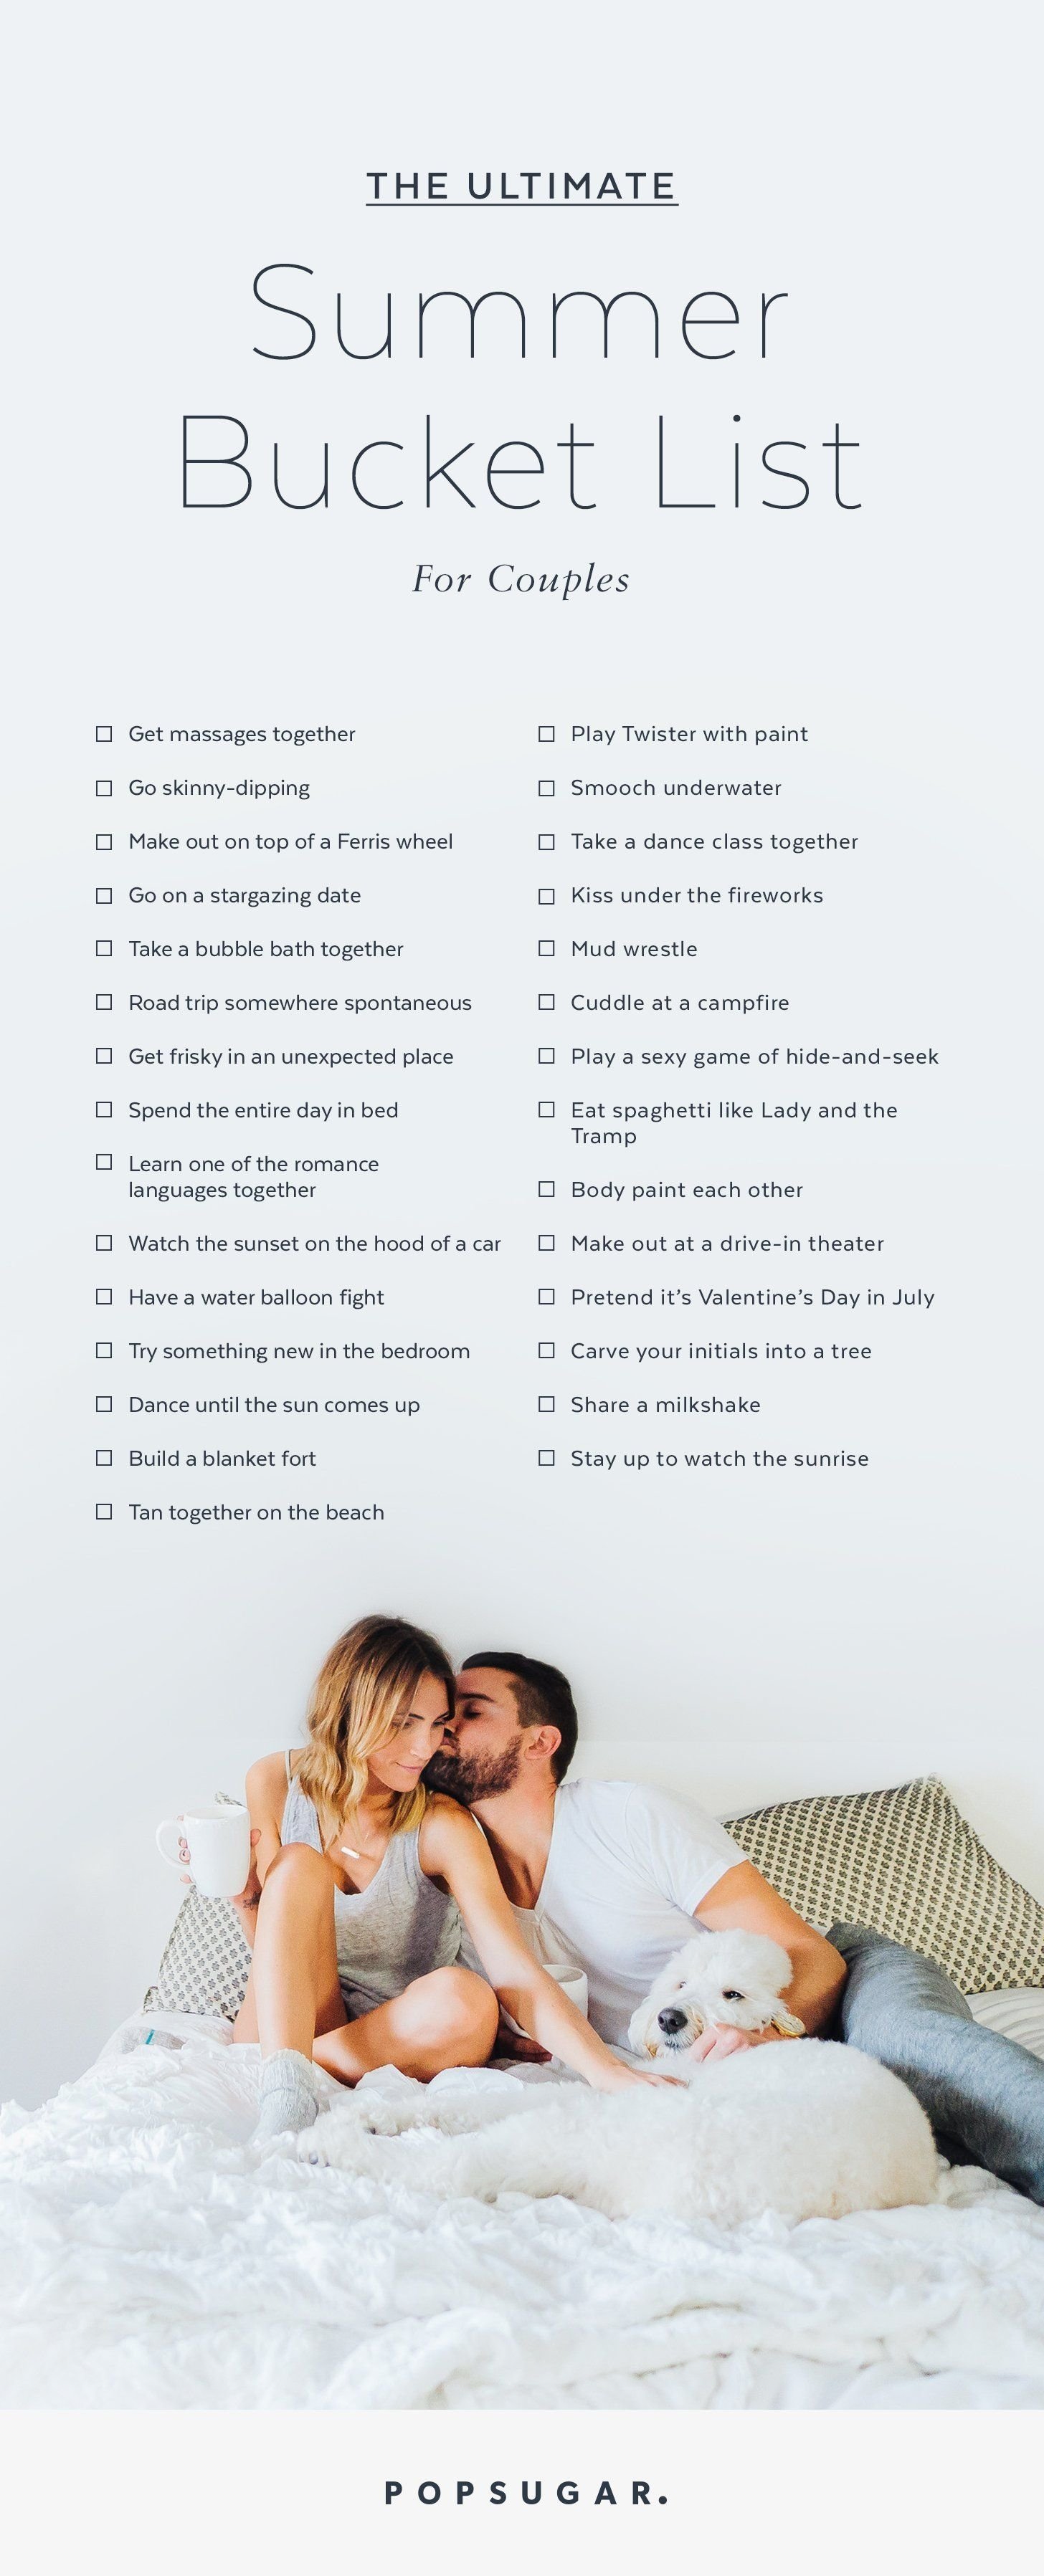 10 Amazing Summer Bucket List Ideas For Couples the ultimate summer couples bucket list buckets couples and summer 2022